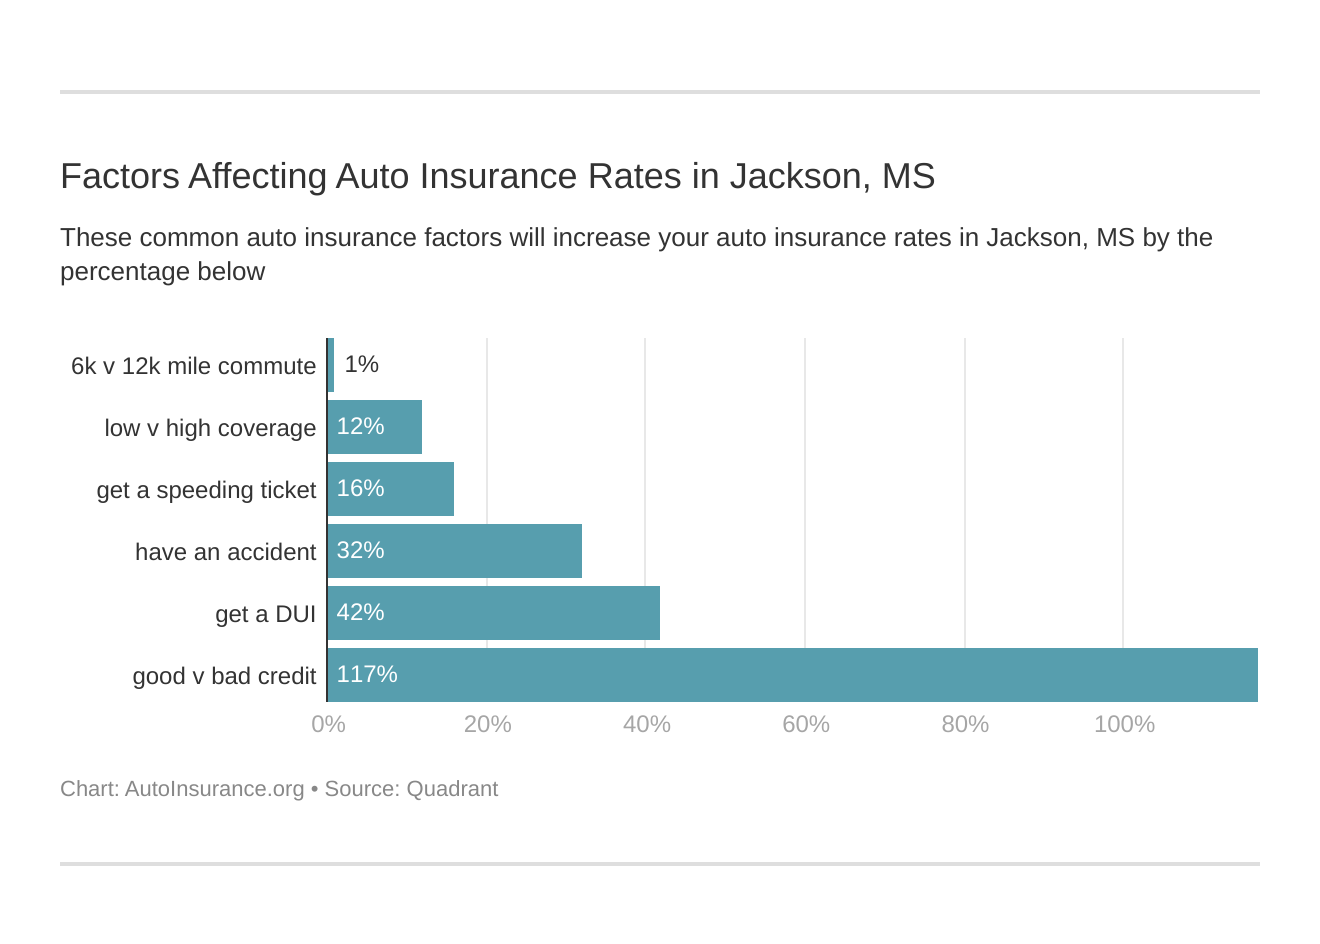 Factors Affecting Auto Insurance Rates in Jackson, MS